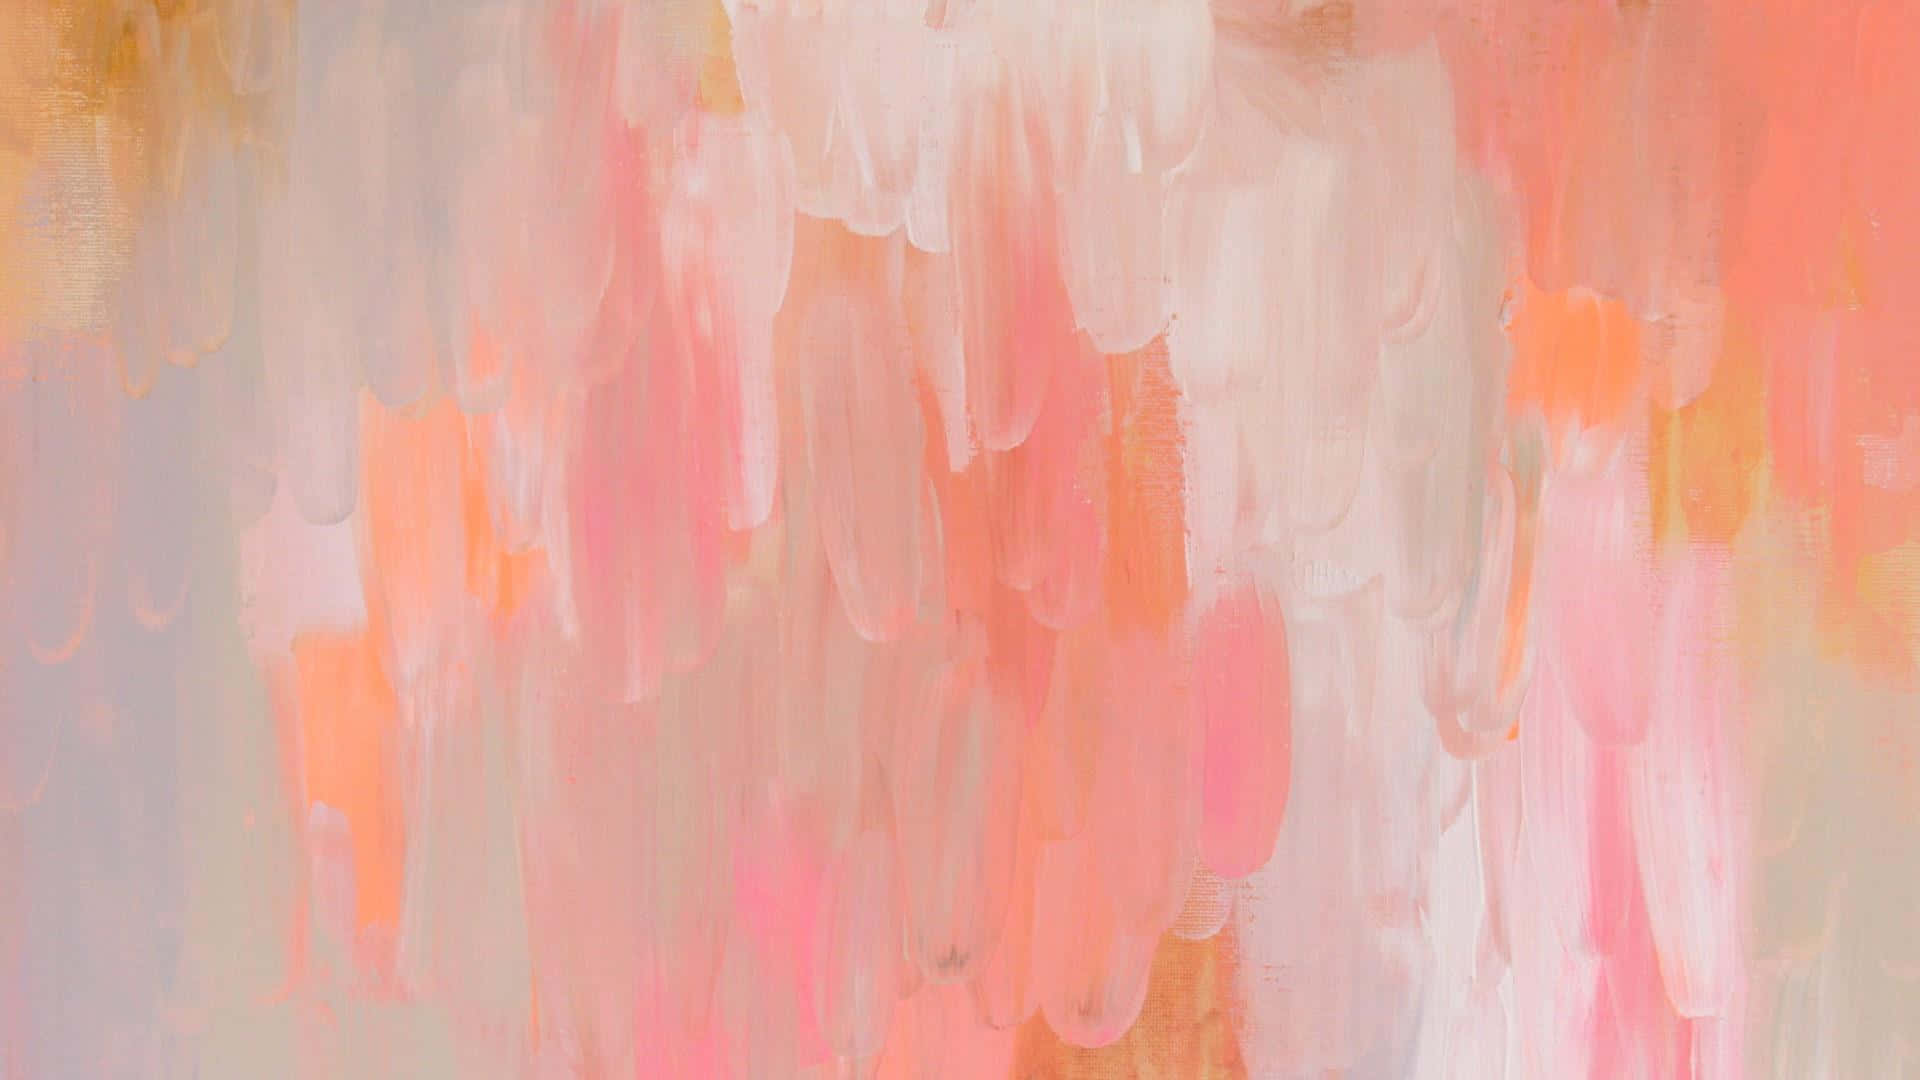 Abstract Painting Of A Pink, Orange And Yellow Painting